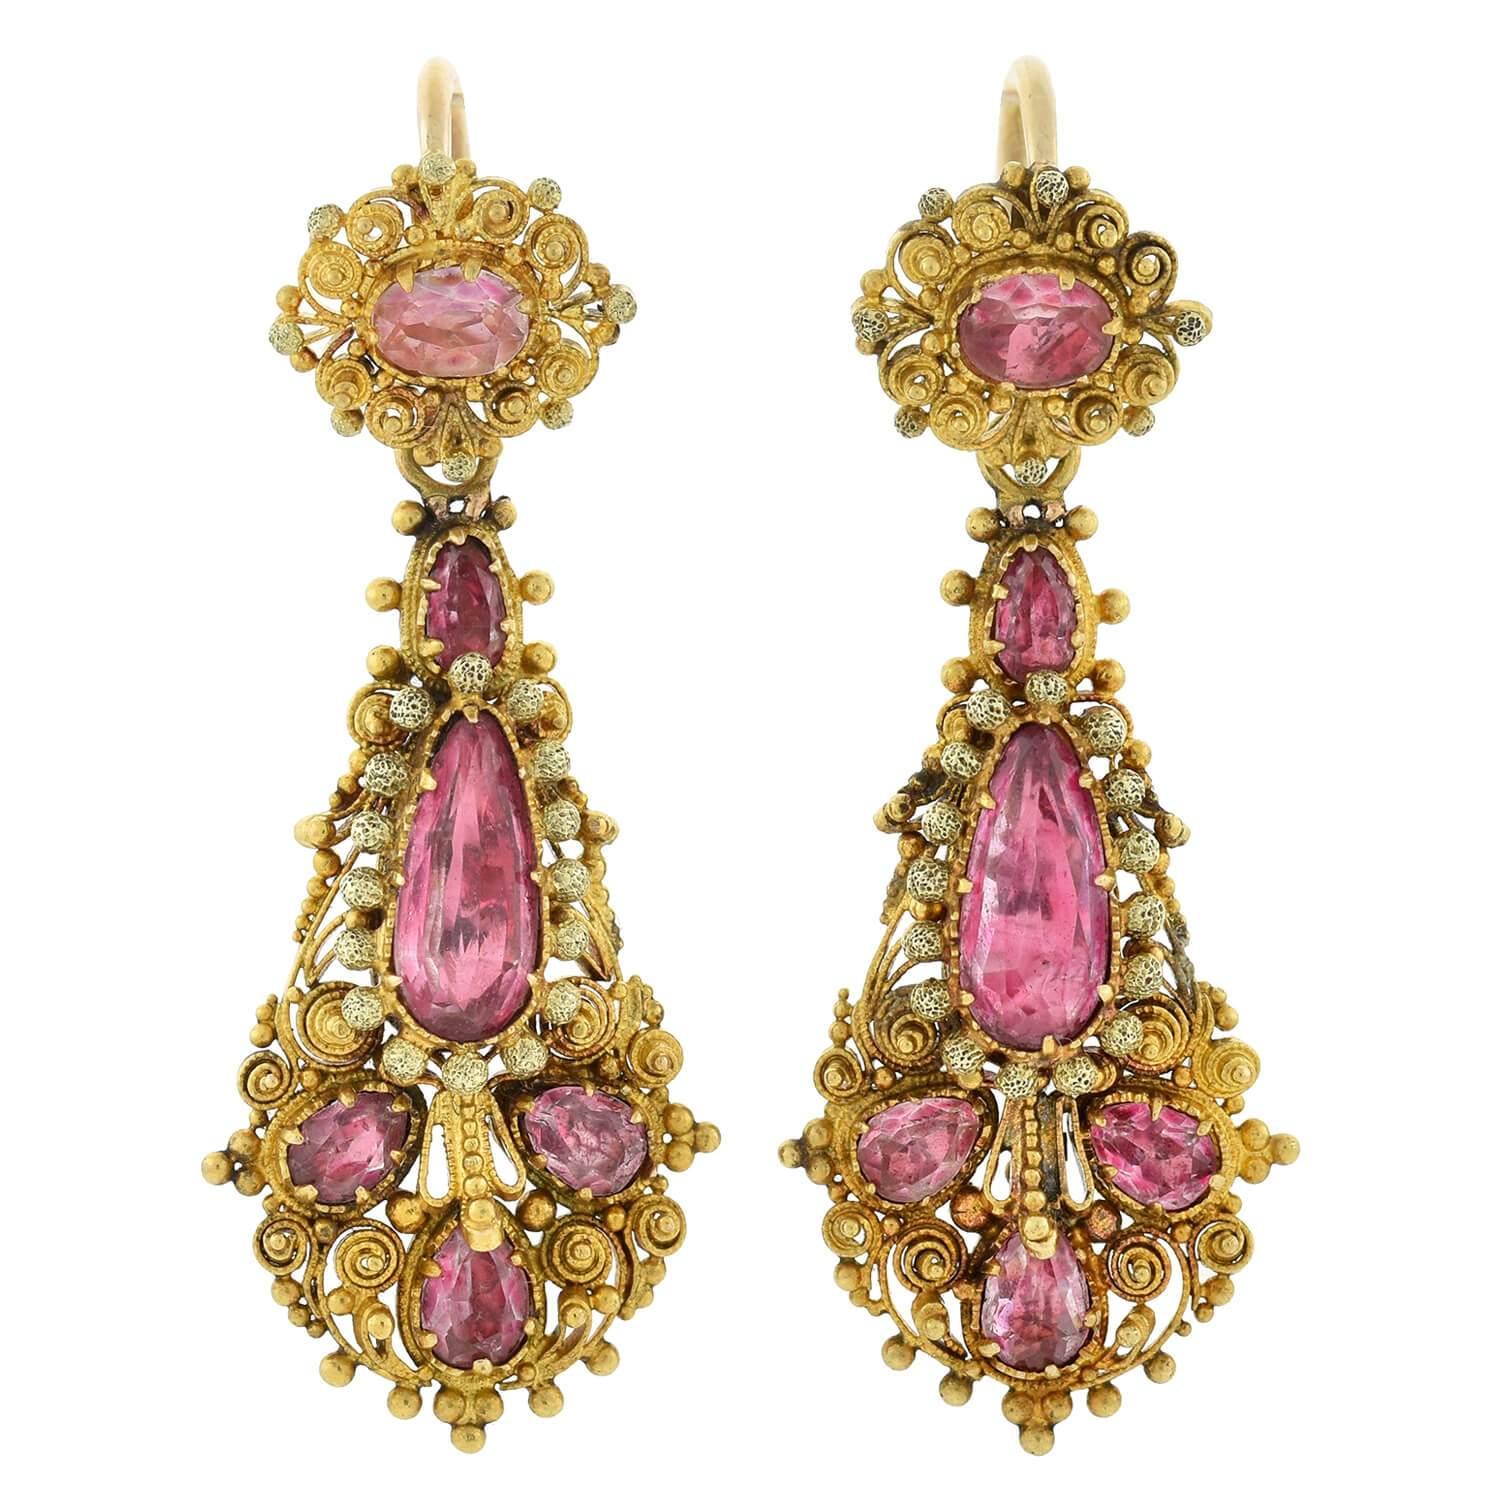 Oval Cut Early Georgian Pink Topaz Necklace and Earring Demi-Parure Set For Sale